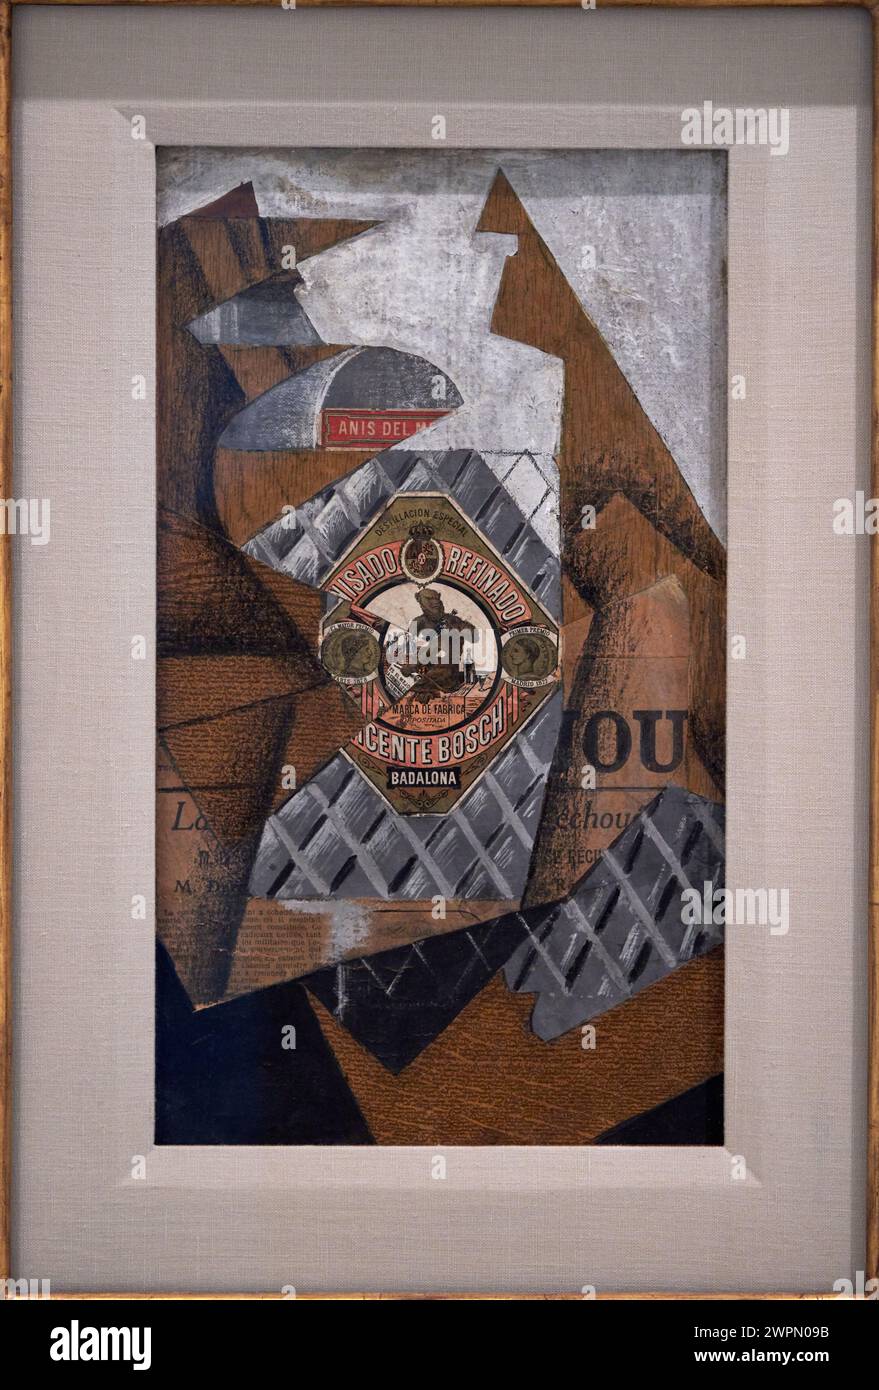 “The Bottle of Anis”, 1914, Juan Gris (1887-1927), Museo Reina Sofia, Madrid, Spagna Foto Stock